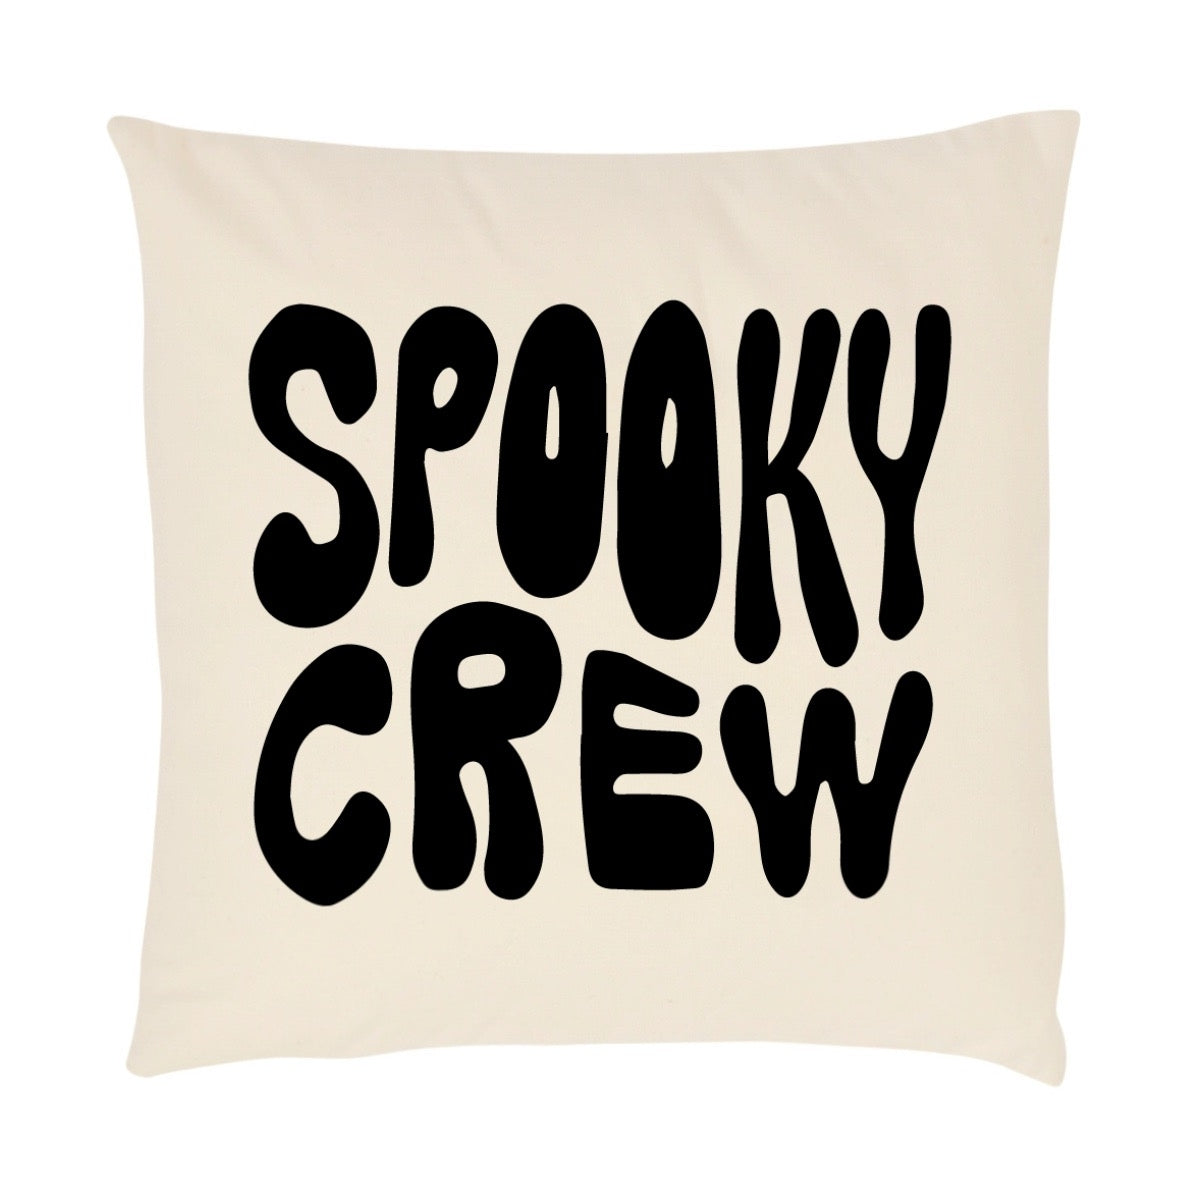 Spooky Crew Pillow Cover